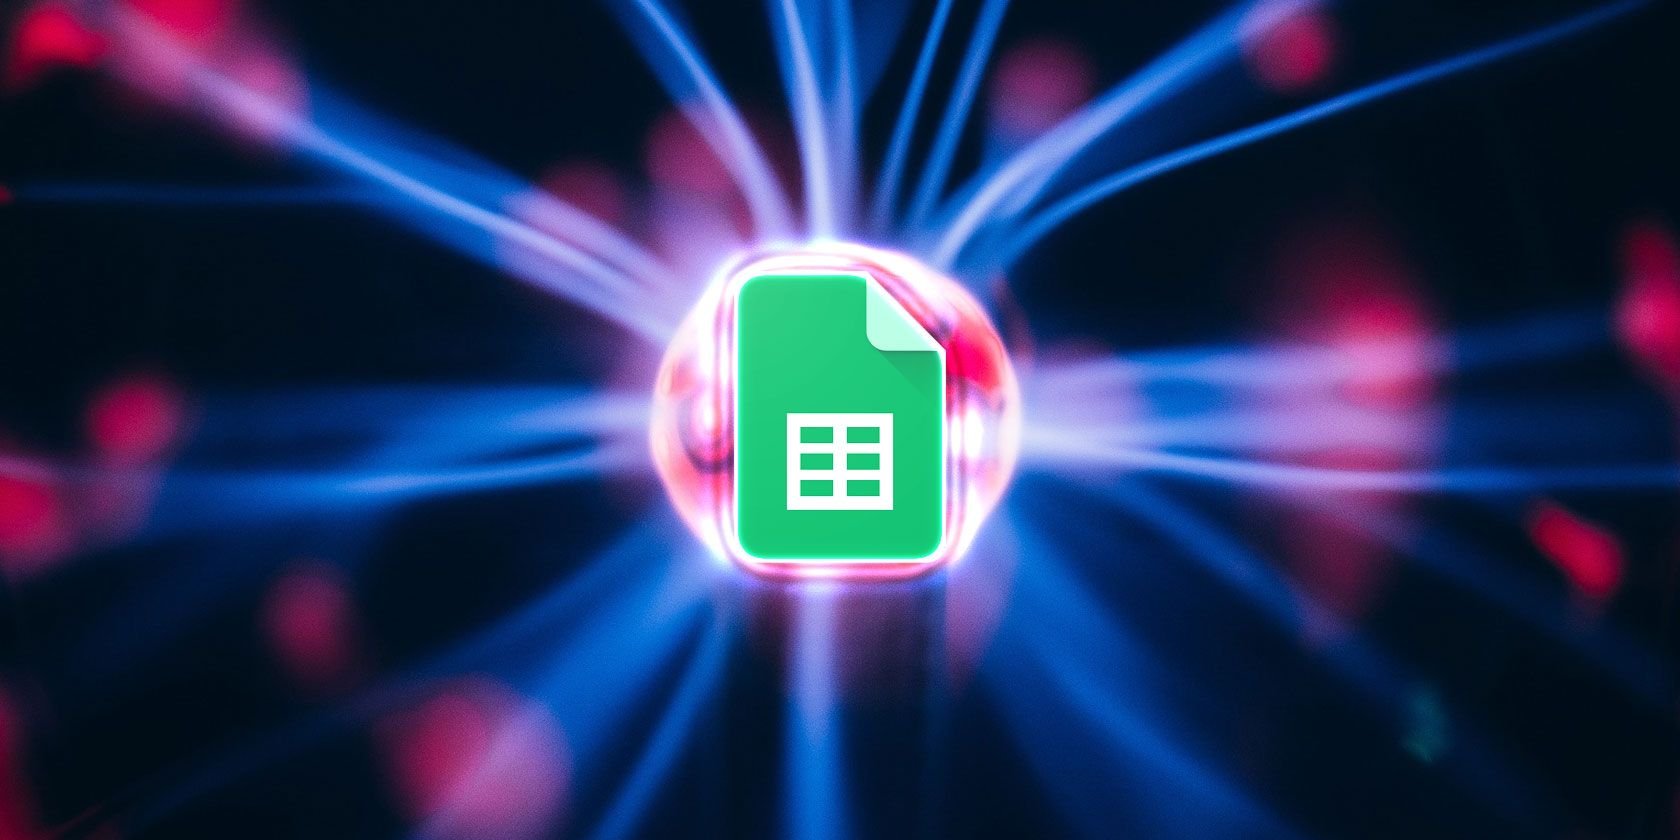 How to Insert Special Symbols and Characters in Google Sheets